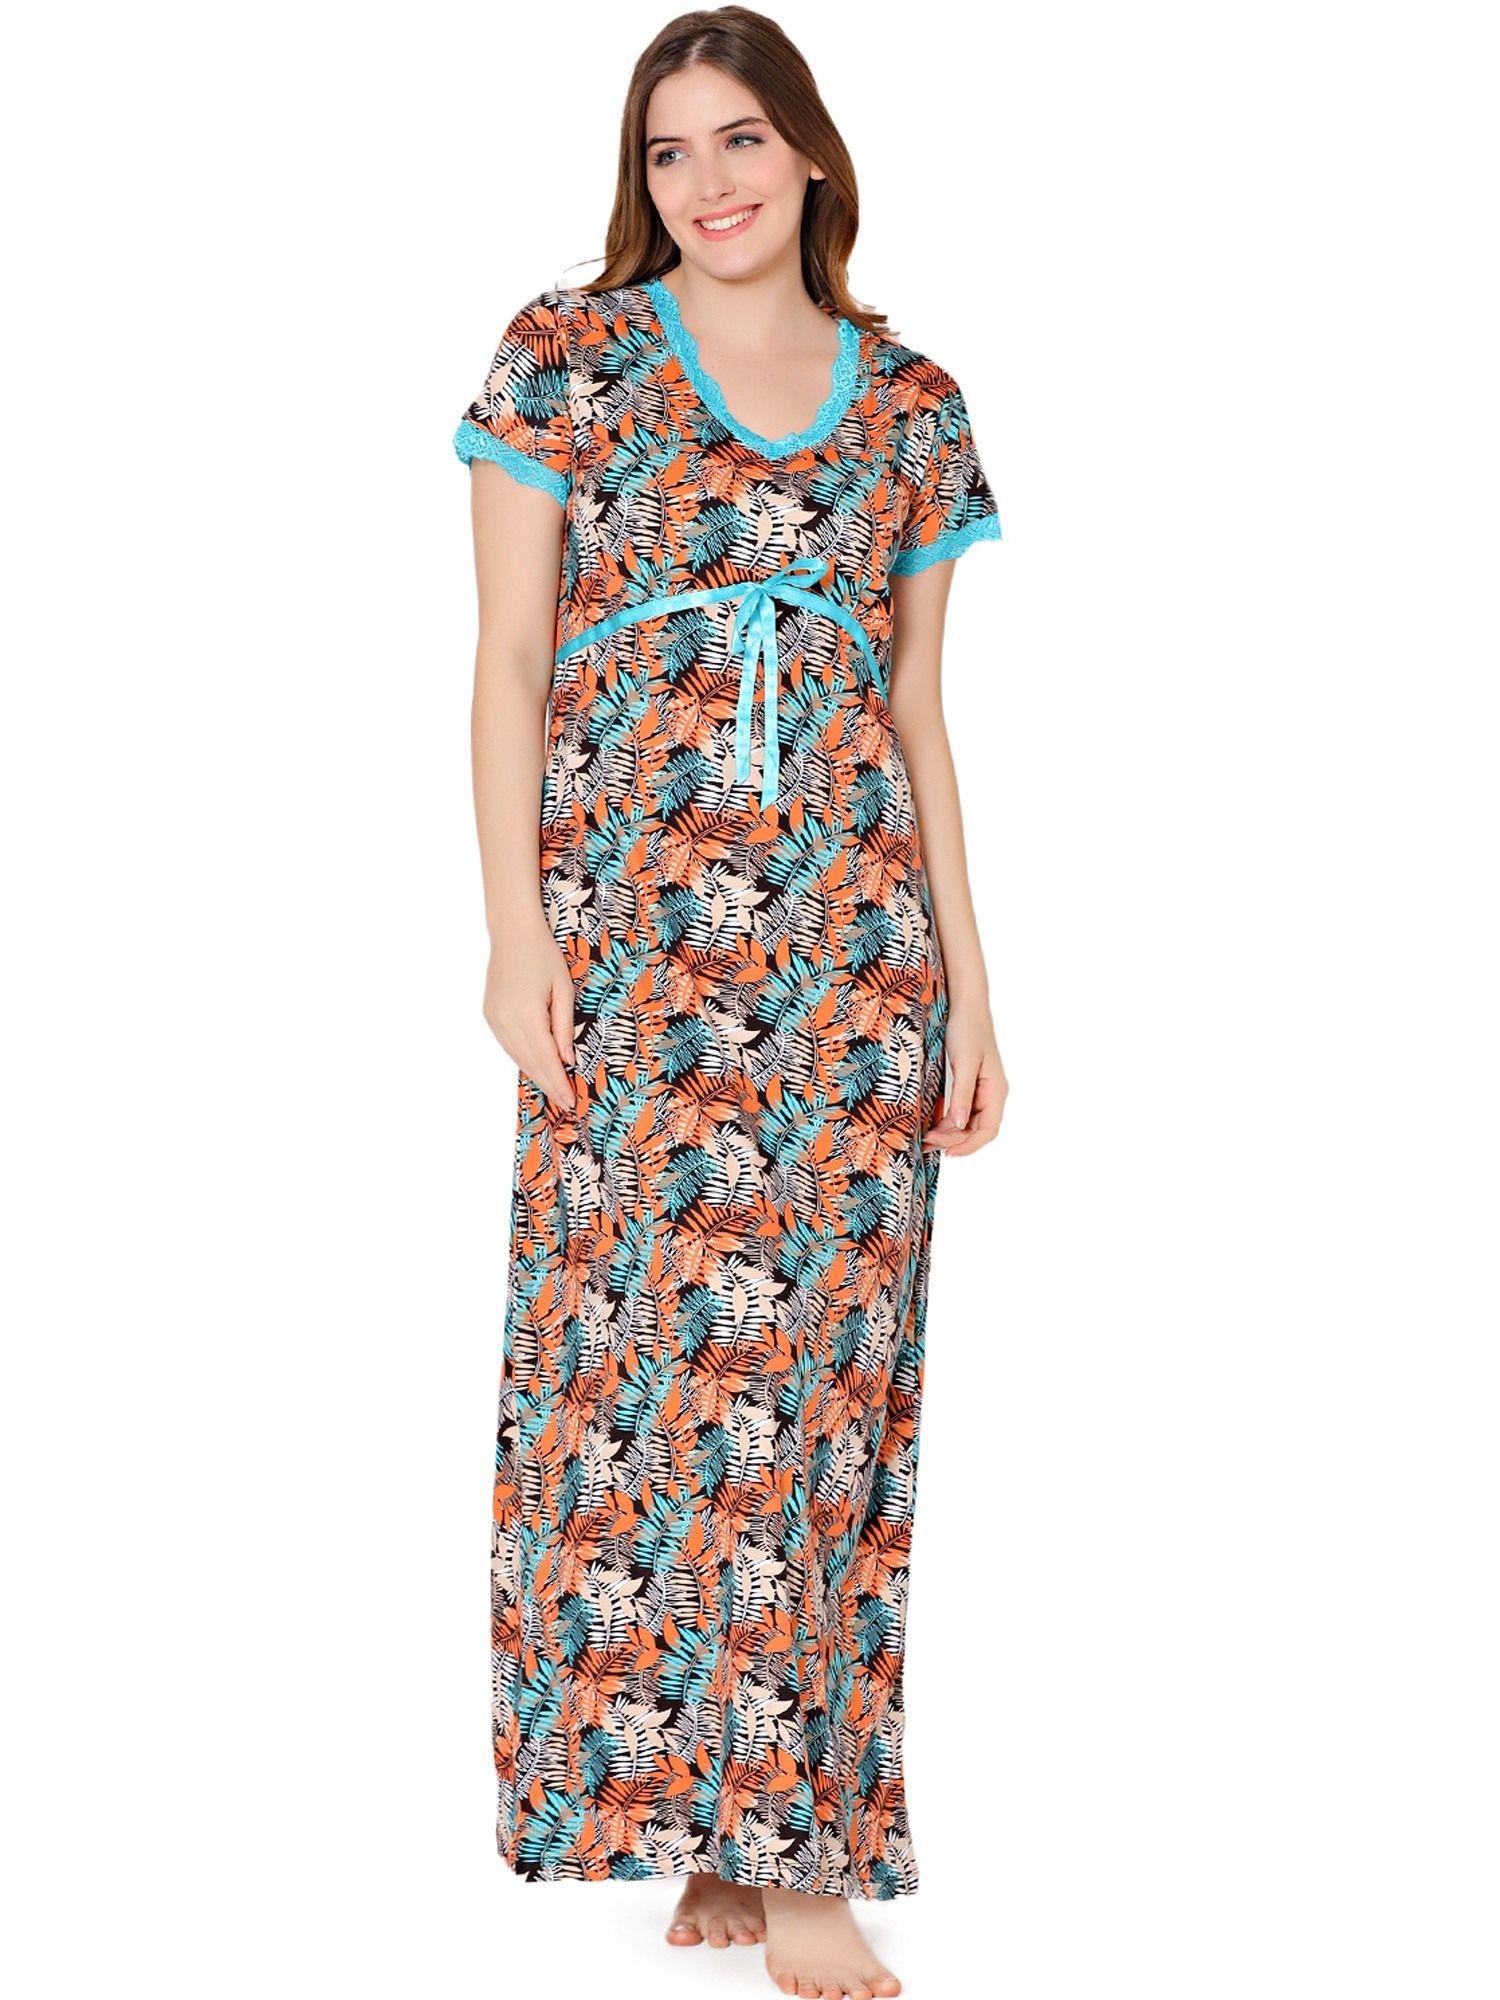 womens combed cotton v neck printed long night dress -bsn10003 multi-color